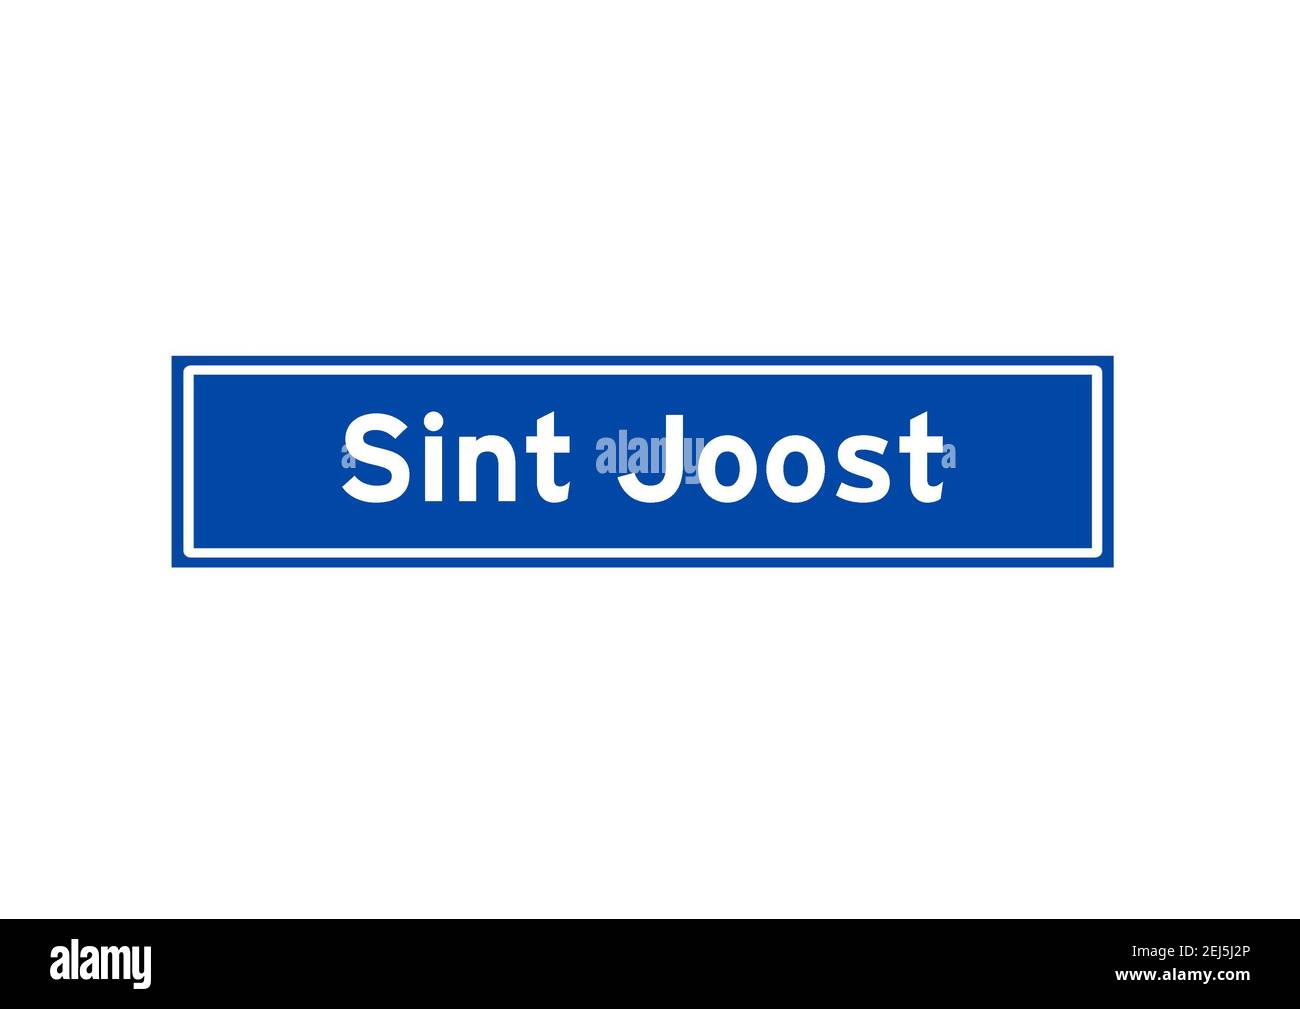 Sint Joost isolated Dutch place name sign. City sign from the Netherlands. Stock Photo